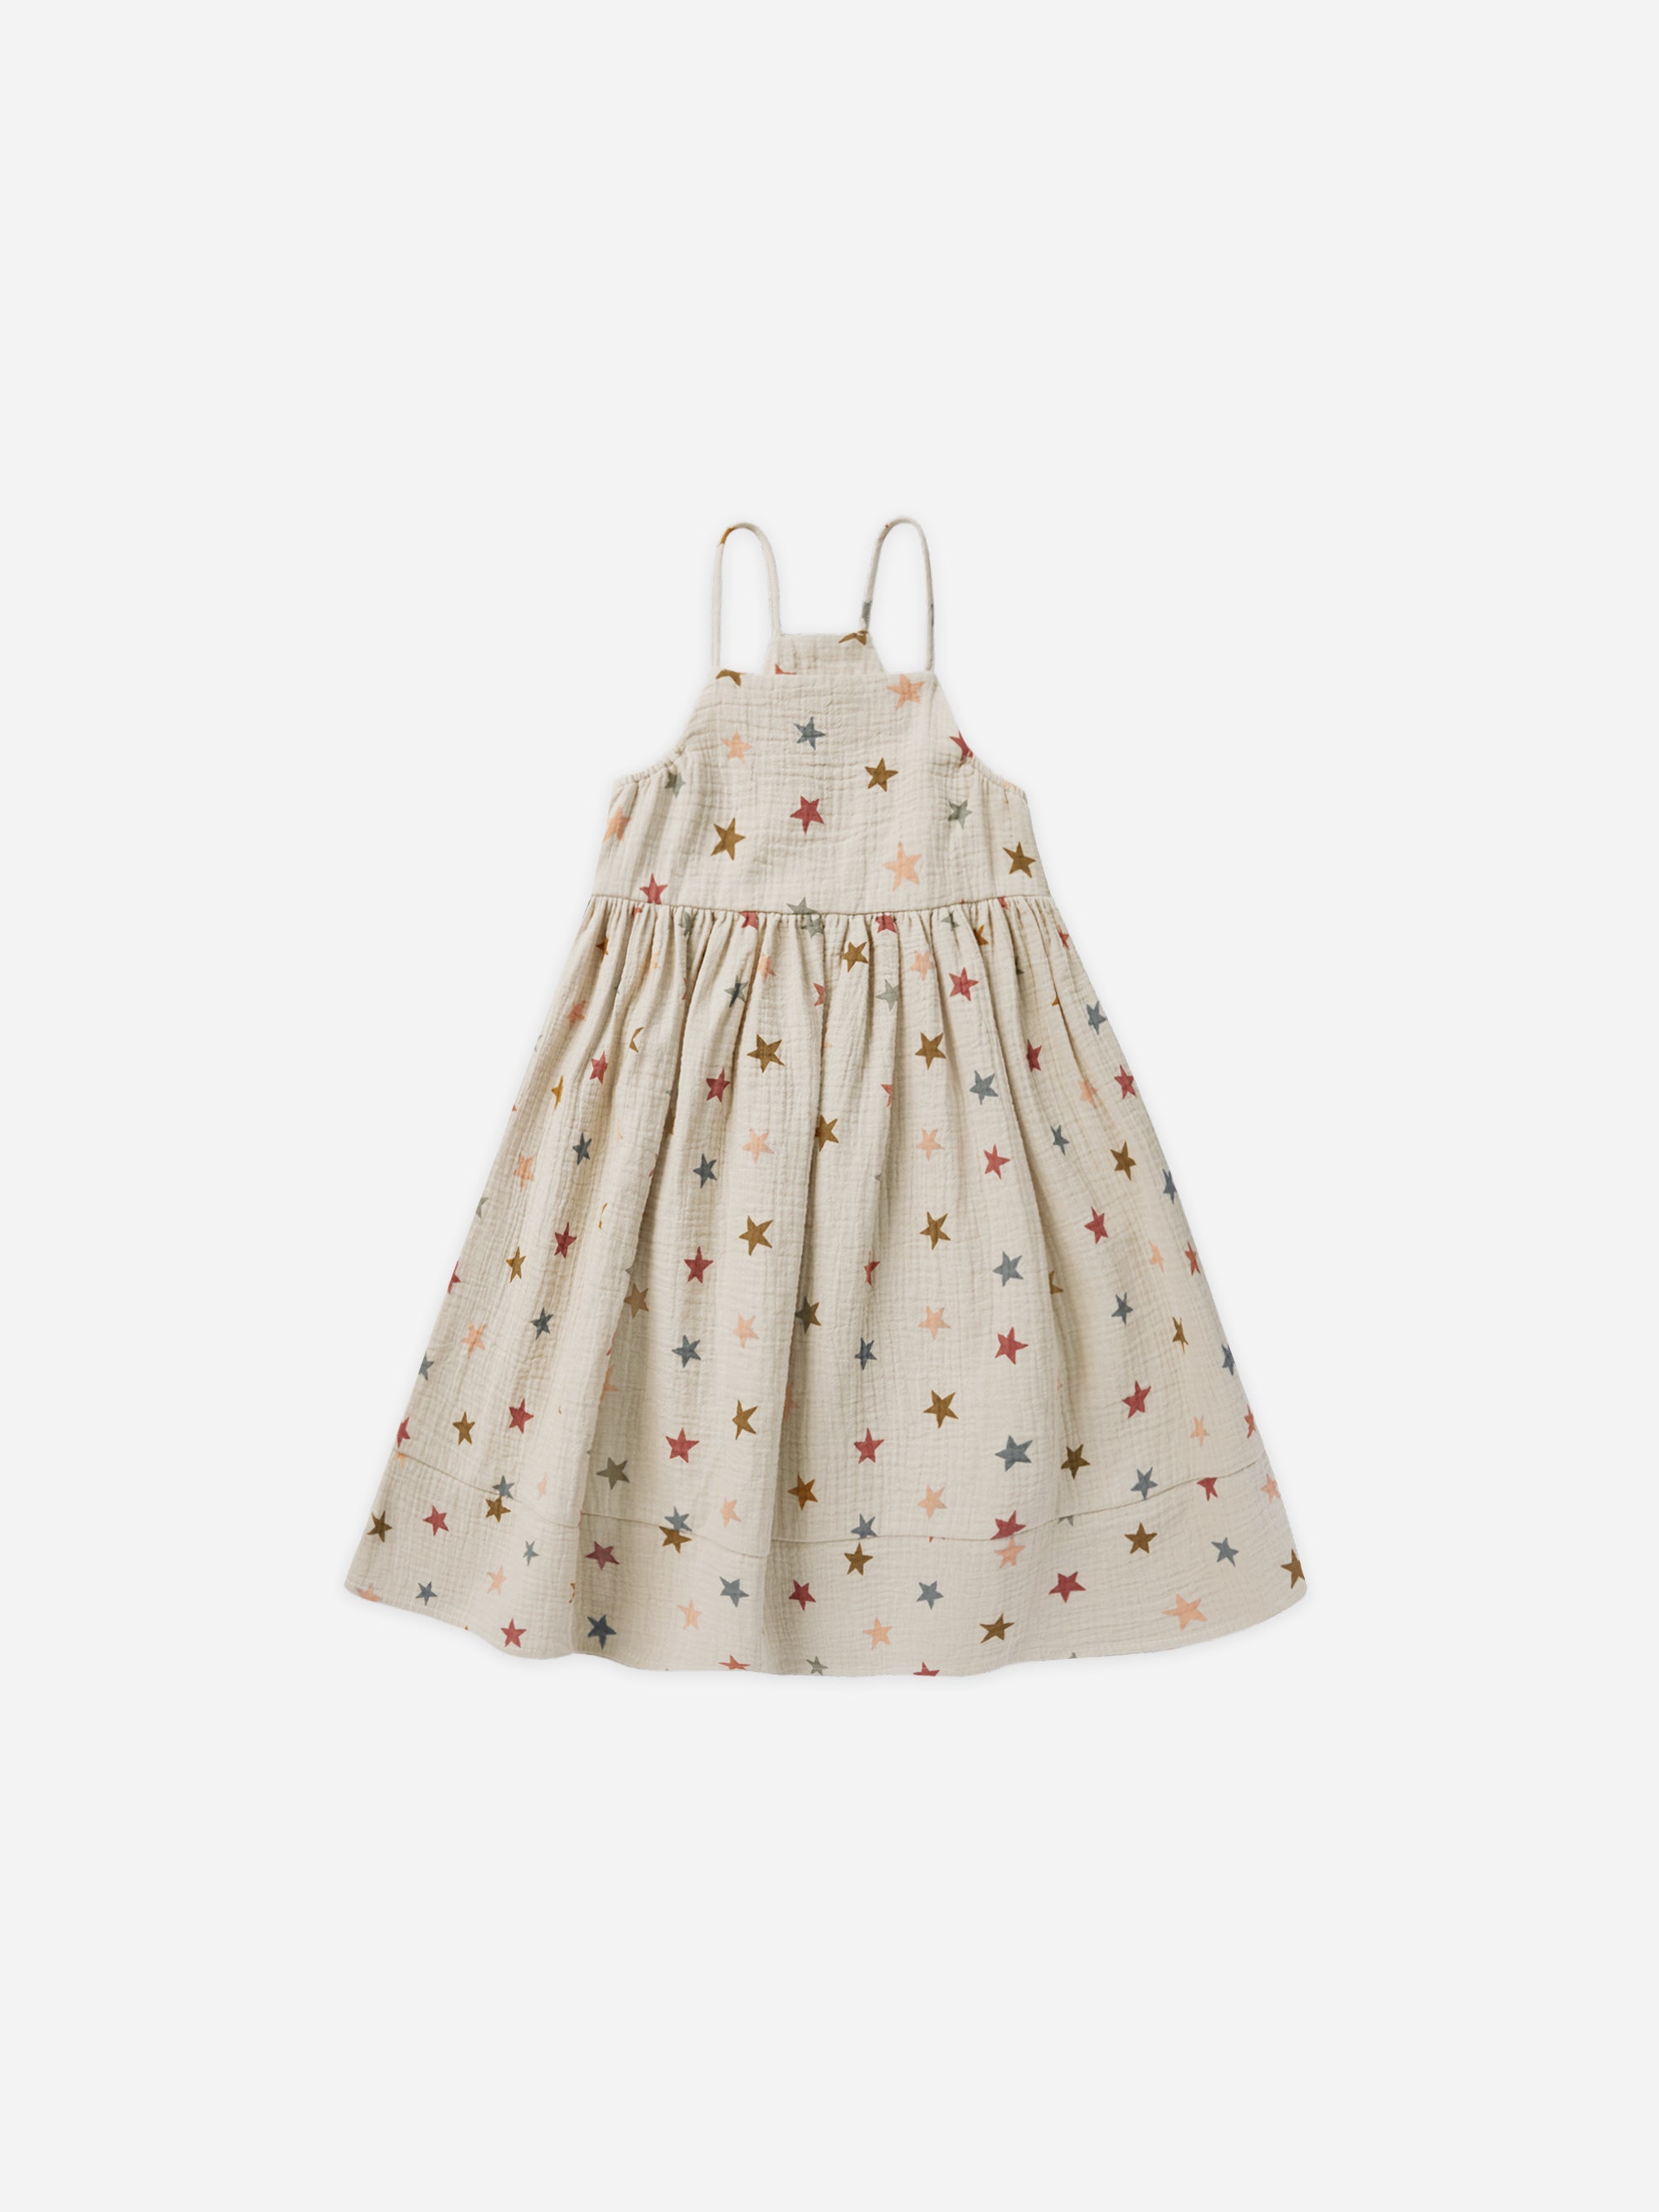 Ava Dress || Stars - Rylee + Cru | Kids Clothes | Trendy Baby Clothes | Modern Infant Outfits |